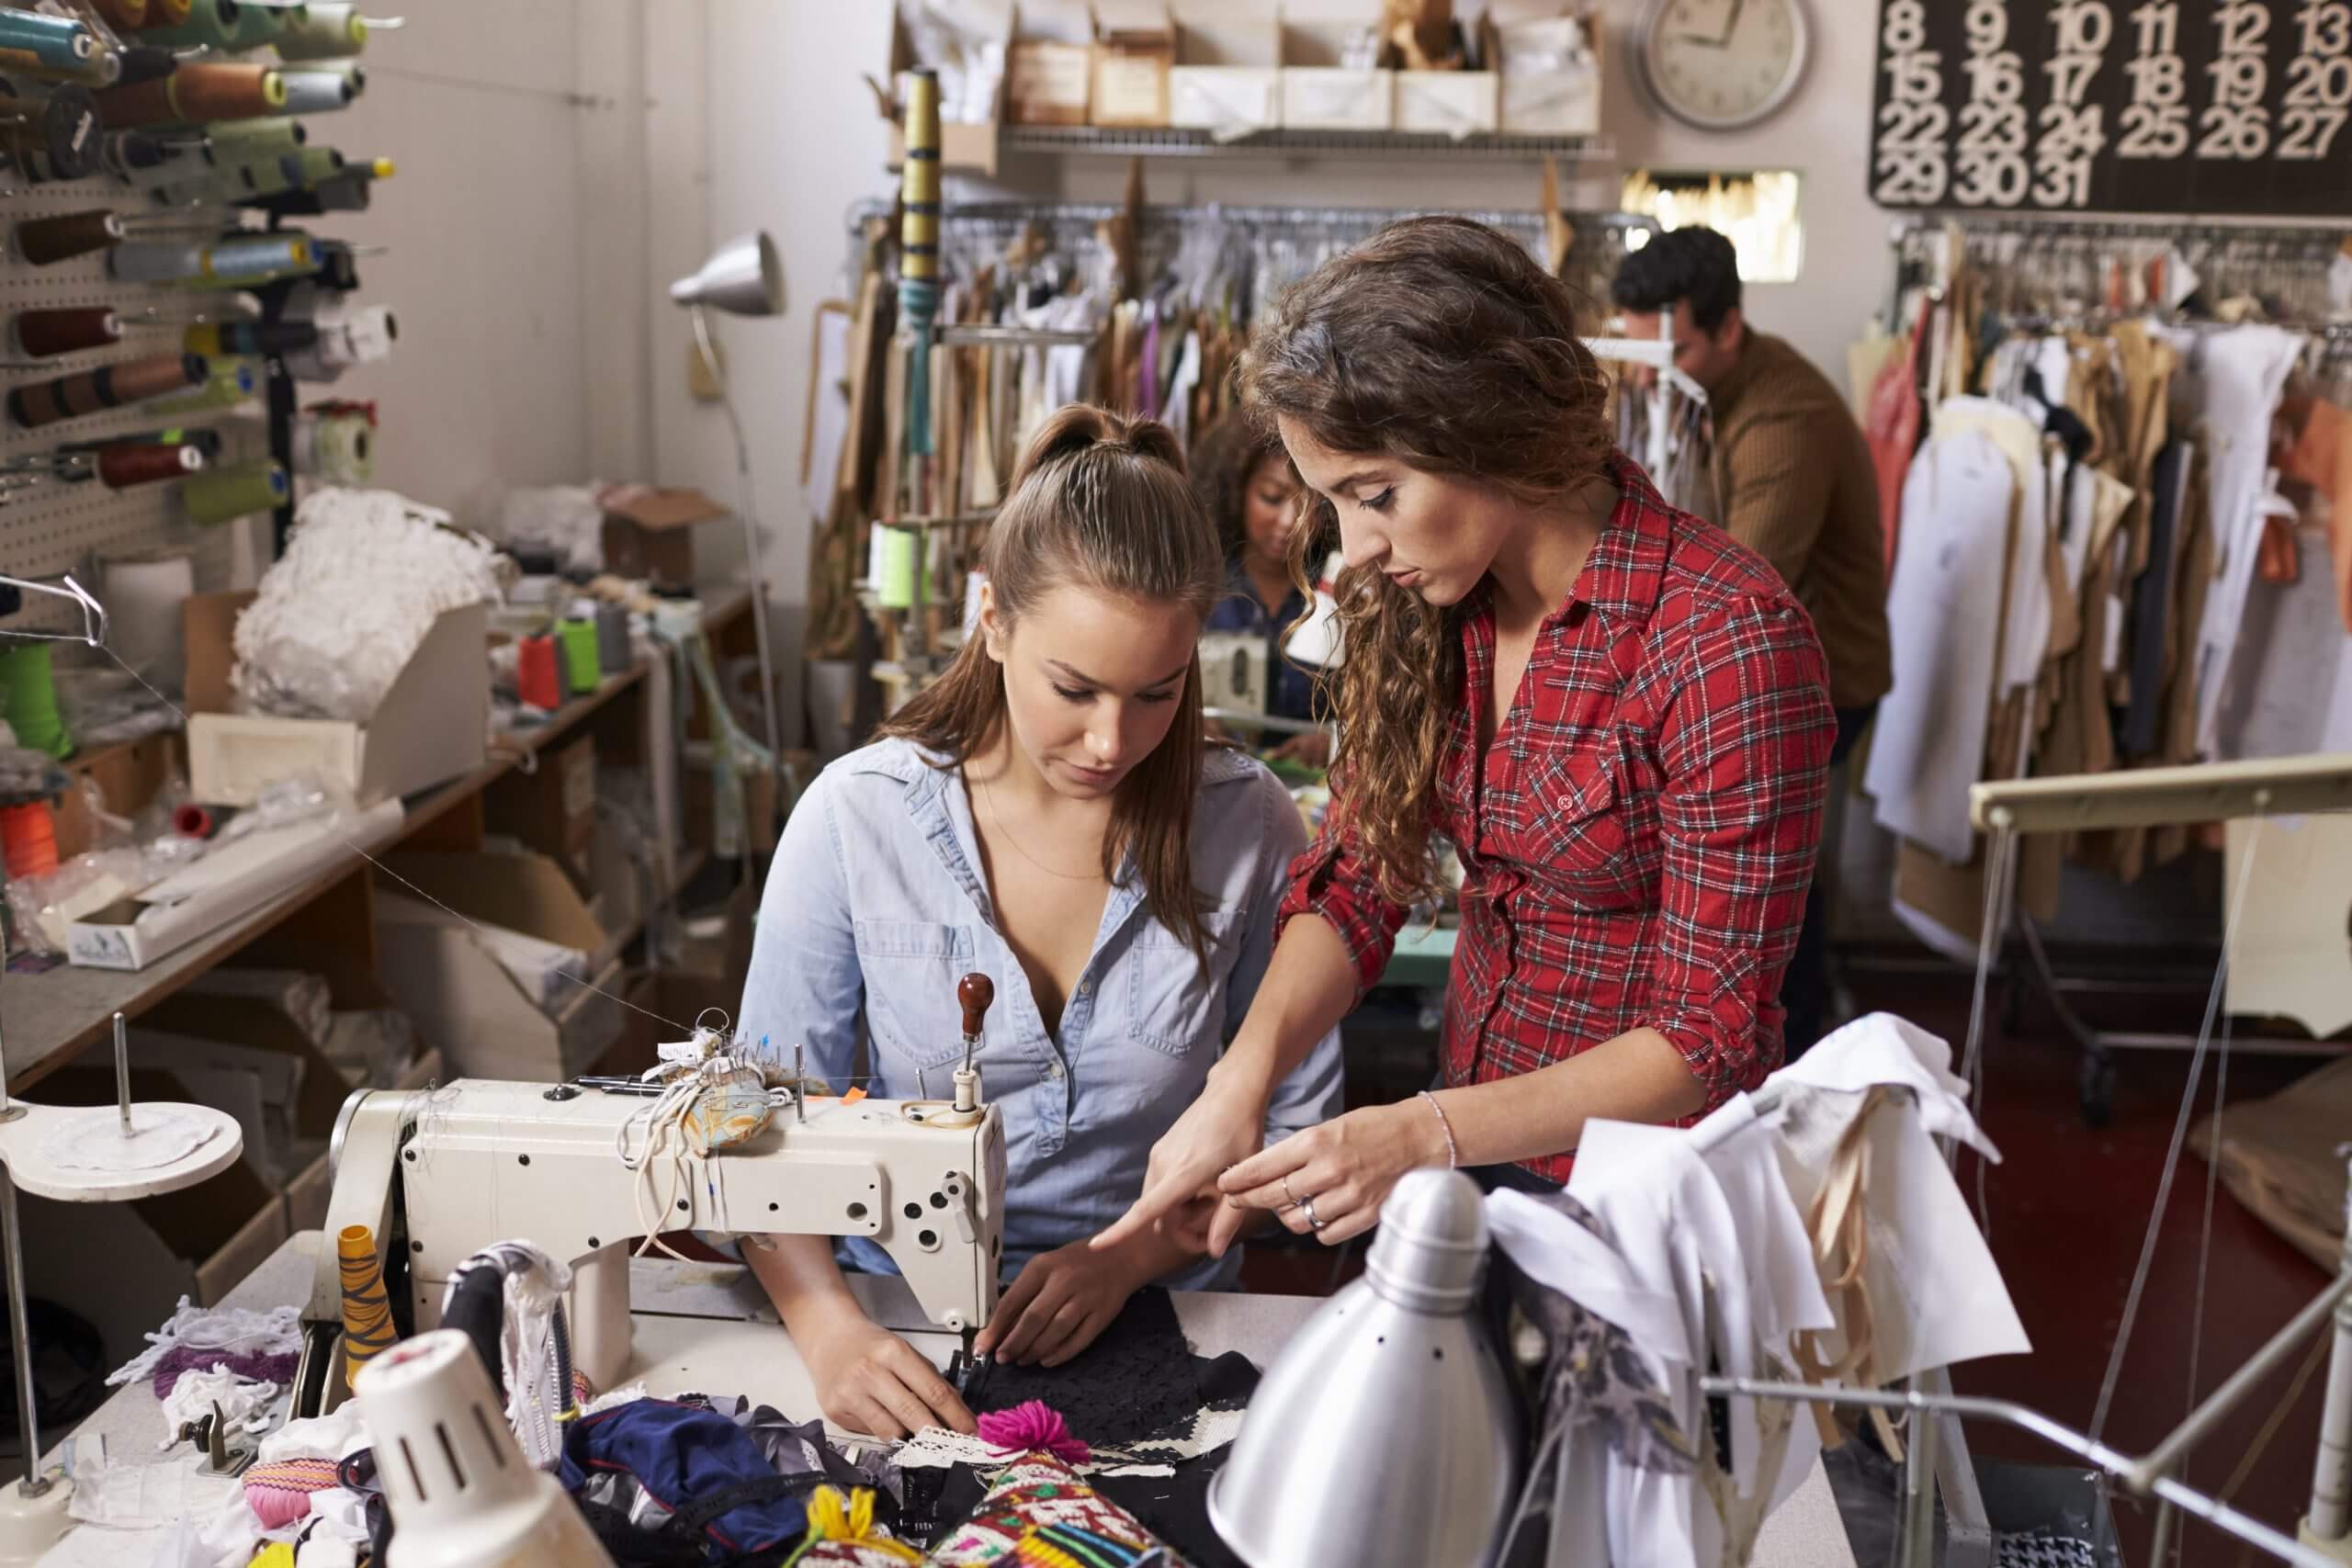 More Consumers Want Sustainable Fashion, But Are Brands Delivering It?